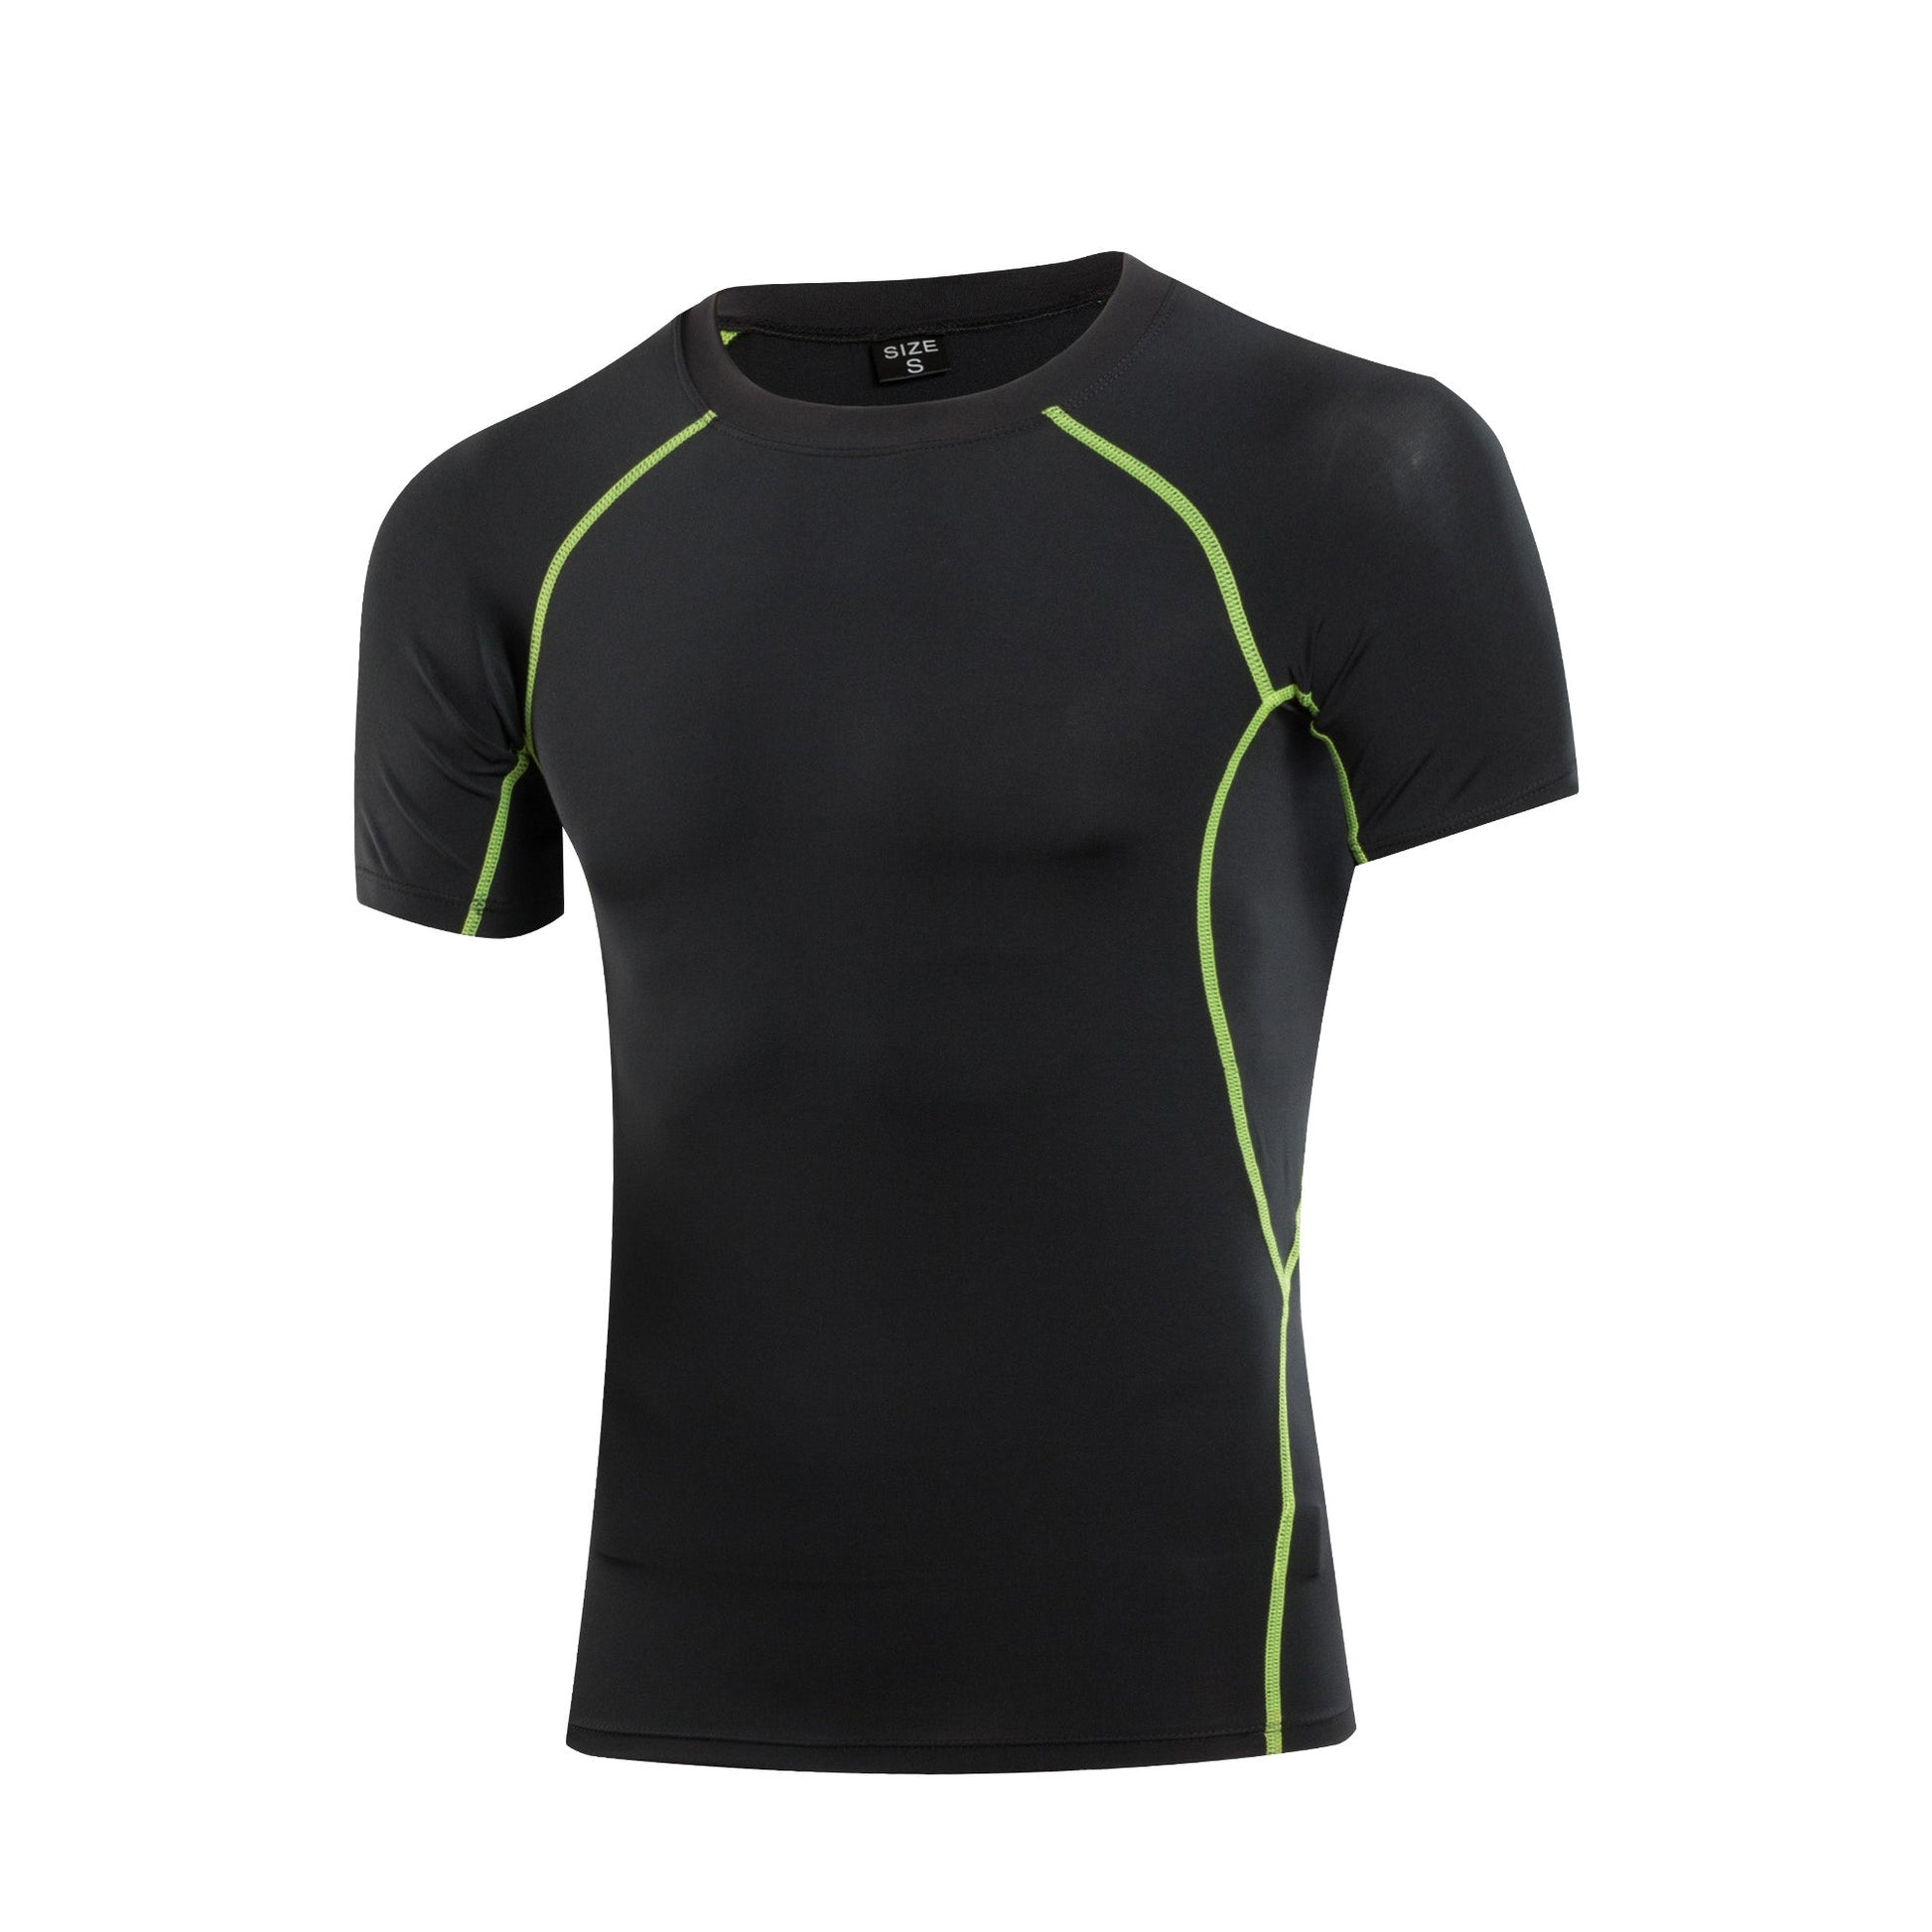 Men Running Athletic Shirt Quick-drying Lightweight Breathable Workout Compresssion Top LANBAOSI